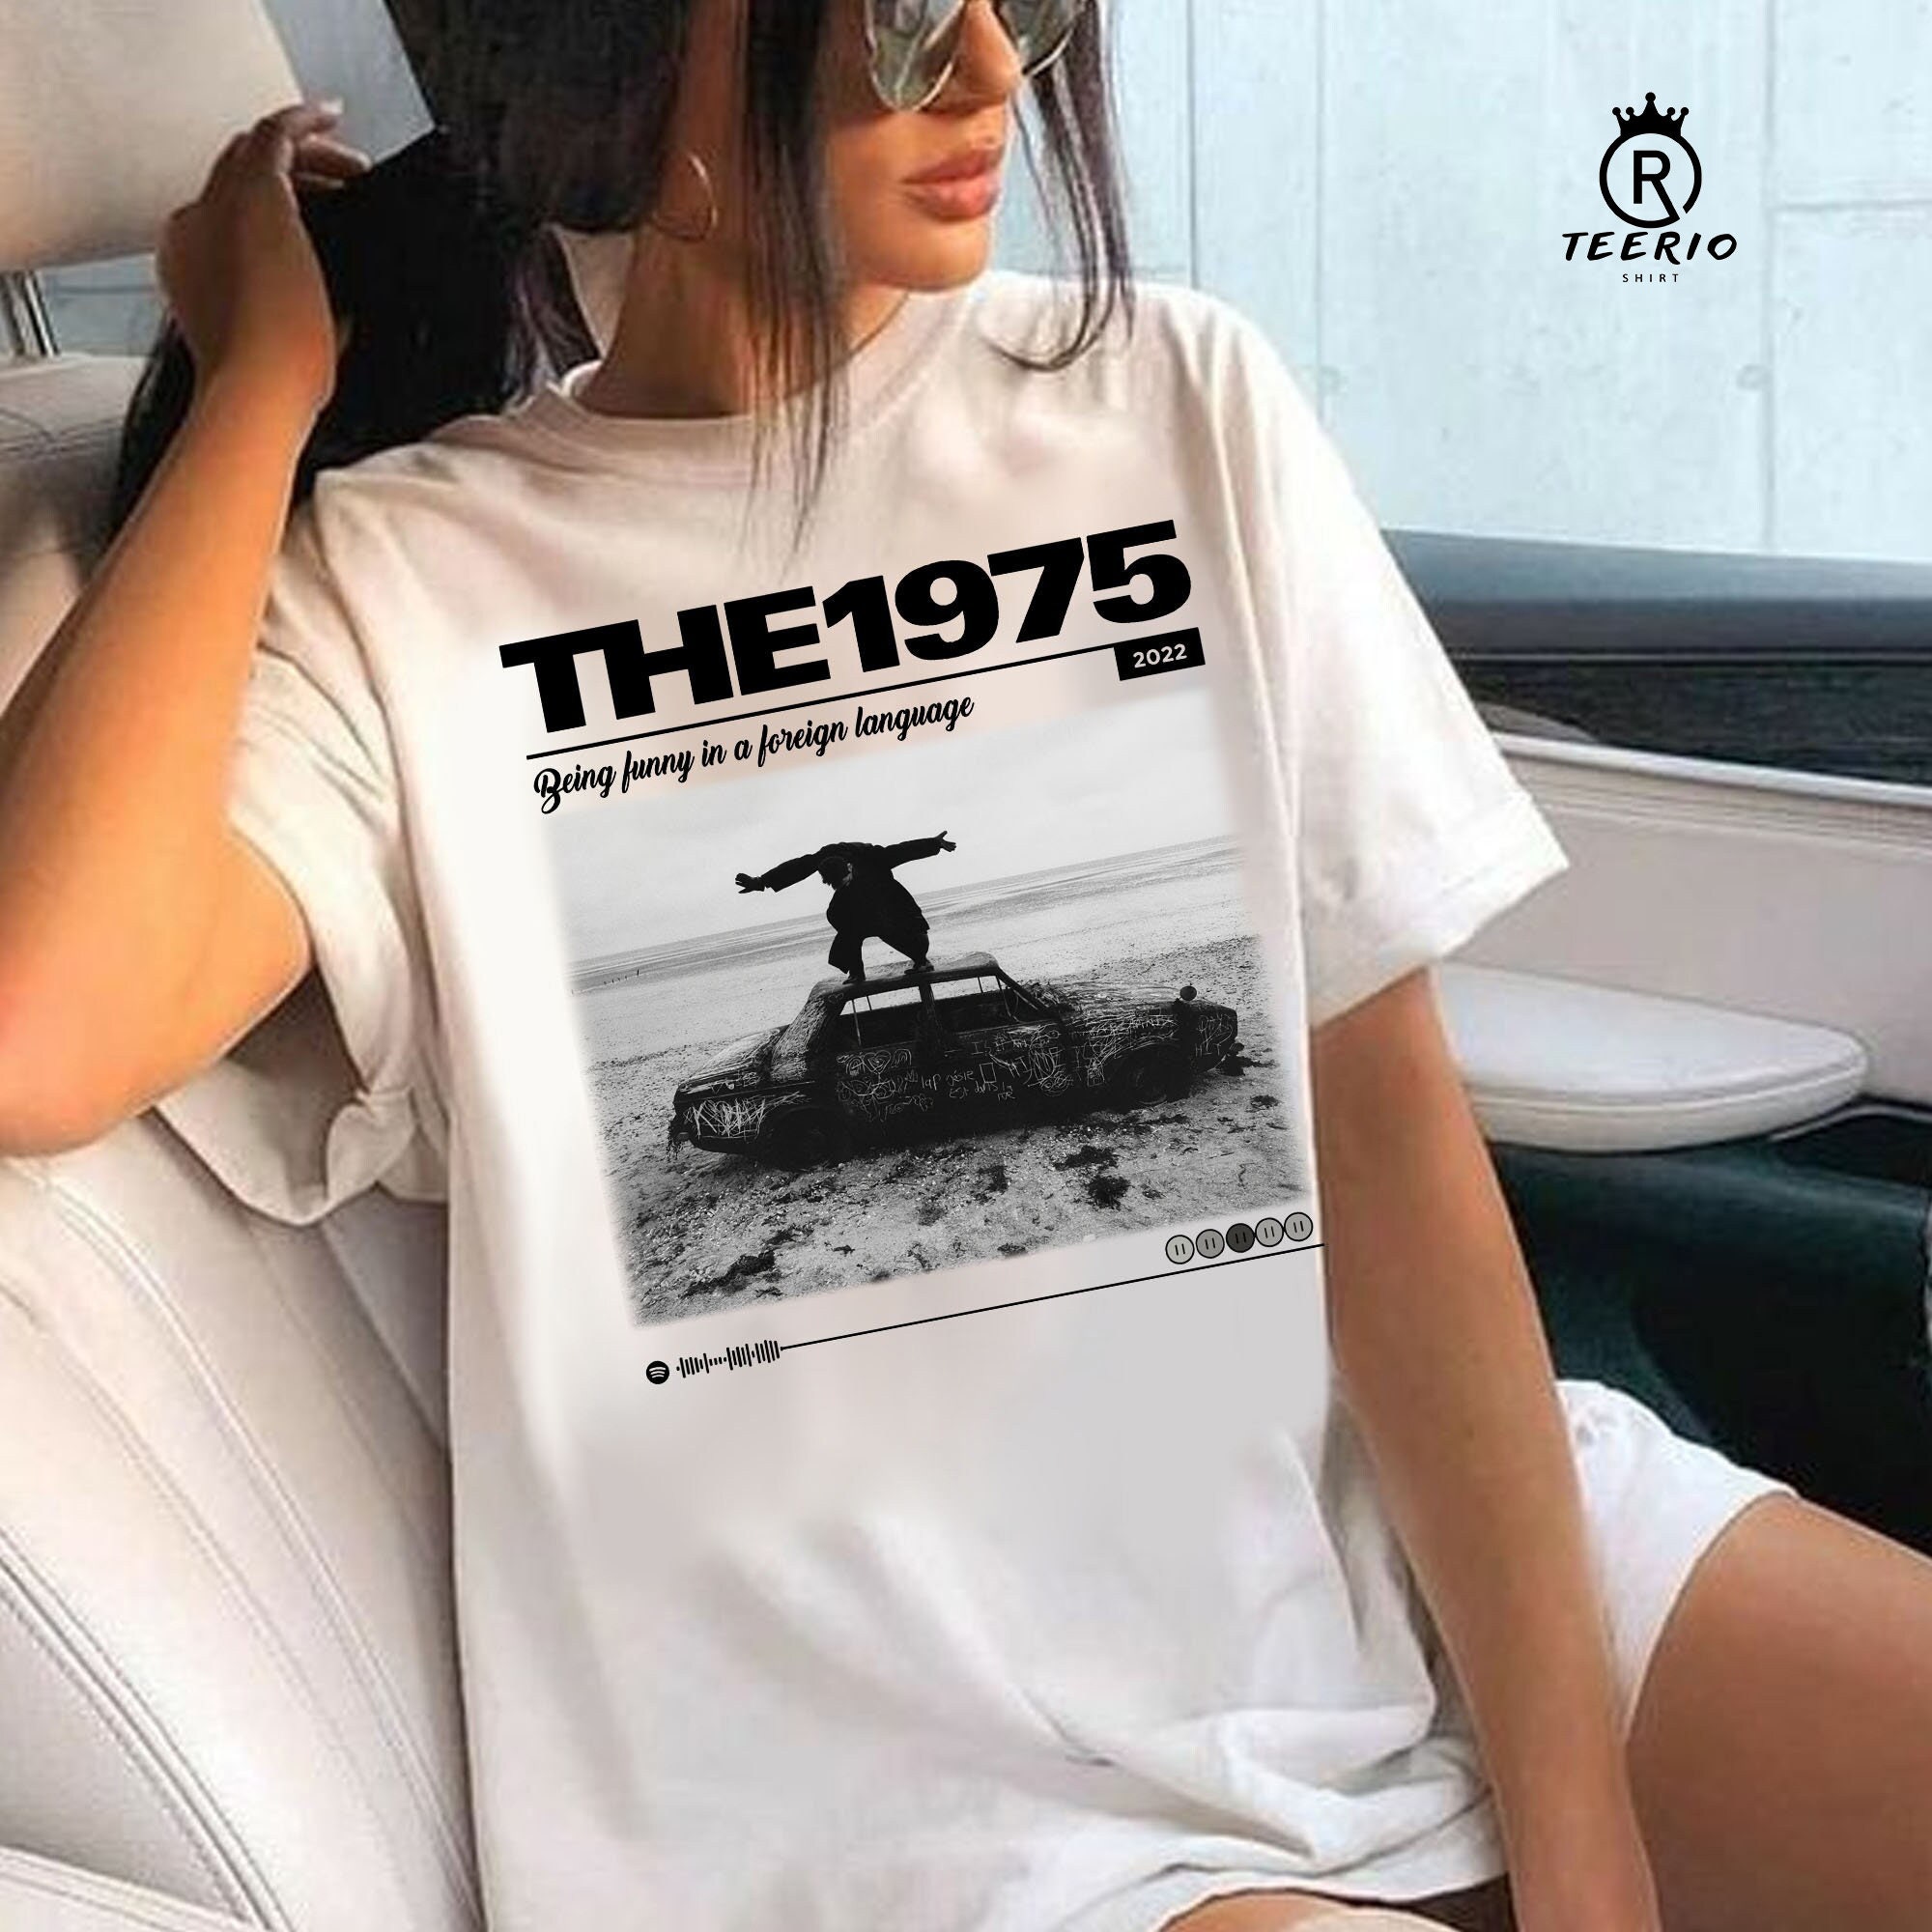 Discover Being Funny in A Foreign Language The 1975 T shirt, The 1975 Band shirt